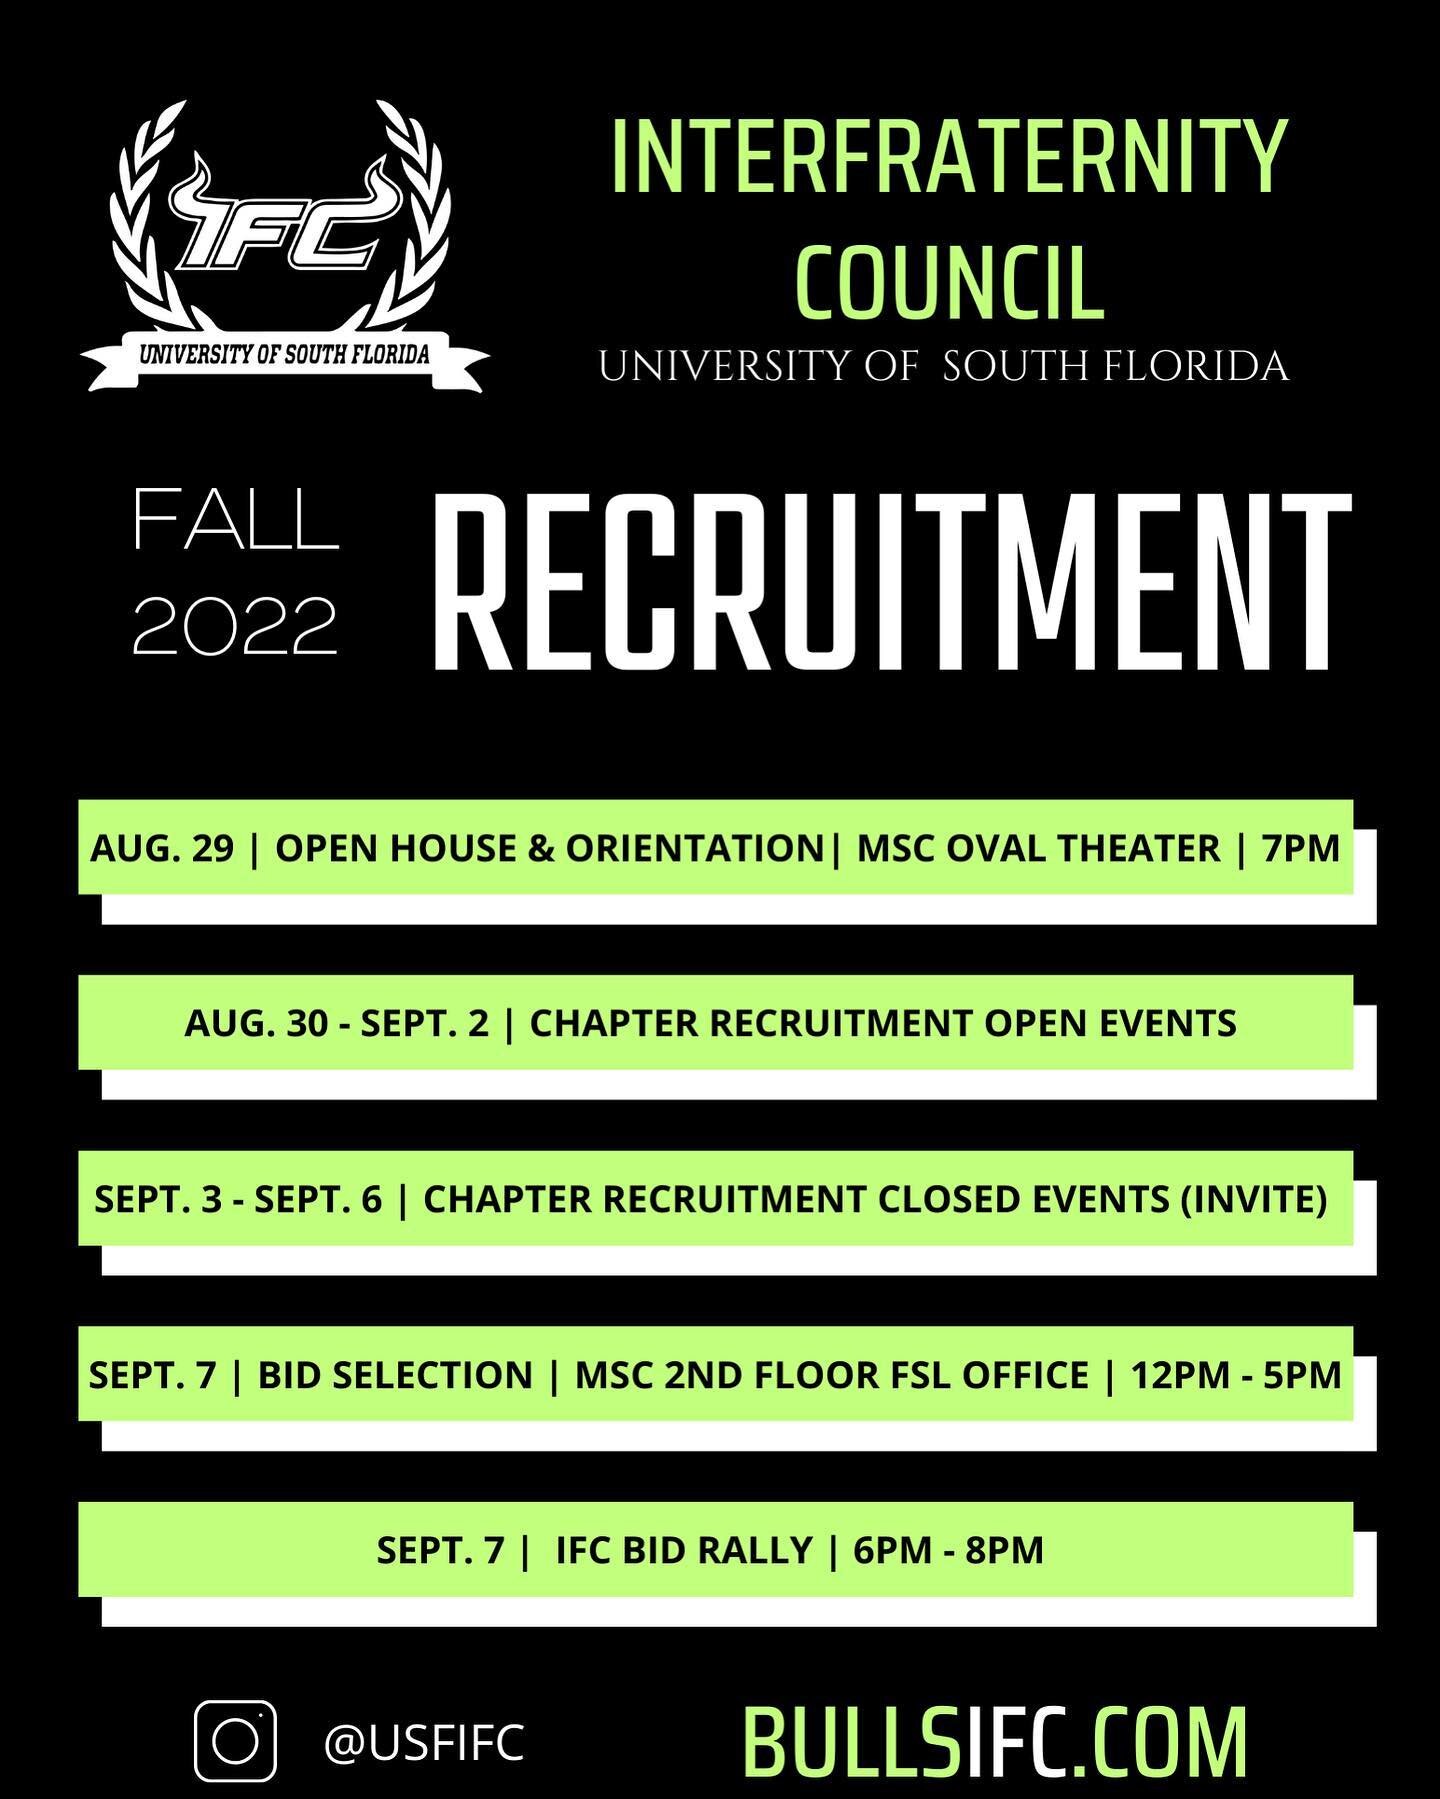 Fall 2022 RECRUITMENT SCHEDULE

We&rsquo;re only a few days away from the start of recruitment week! Here&rsquo;s a look at the recruitment schedule for the upcoming week. Be sure to get registered through the link in bio. Registration CLOSES Septemb